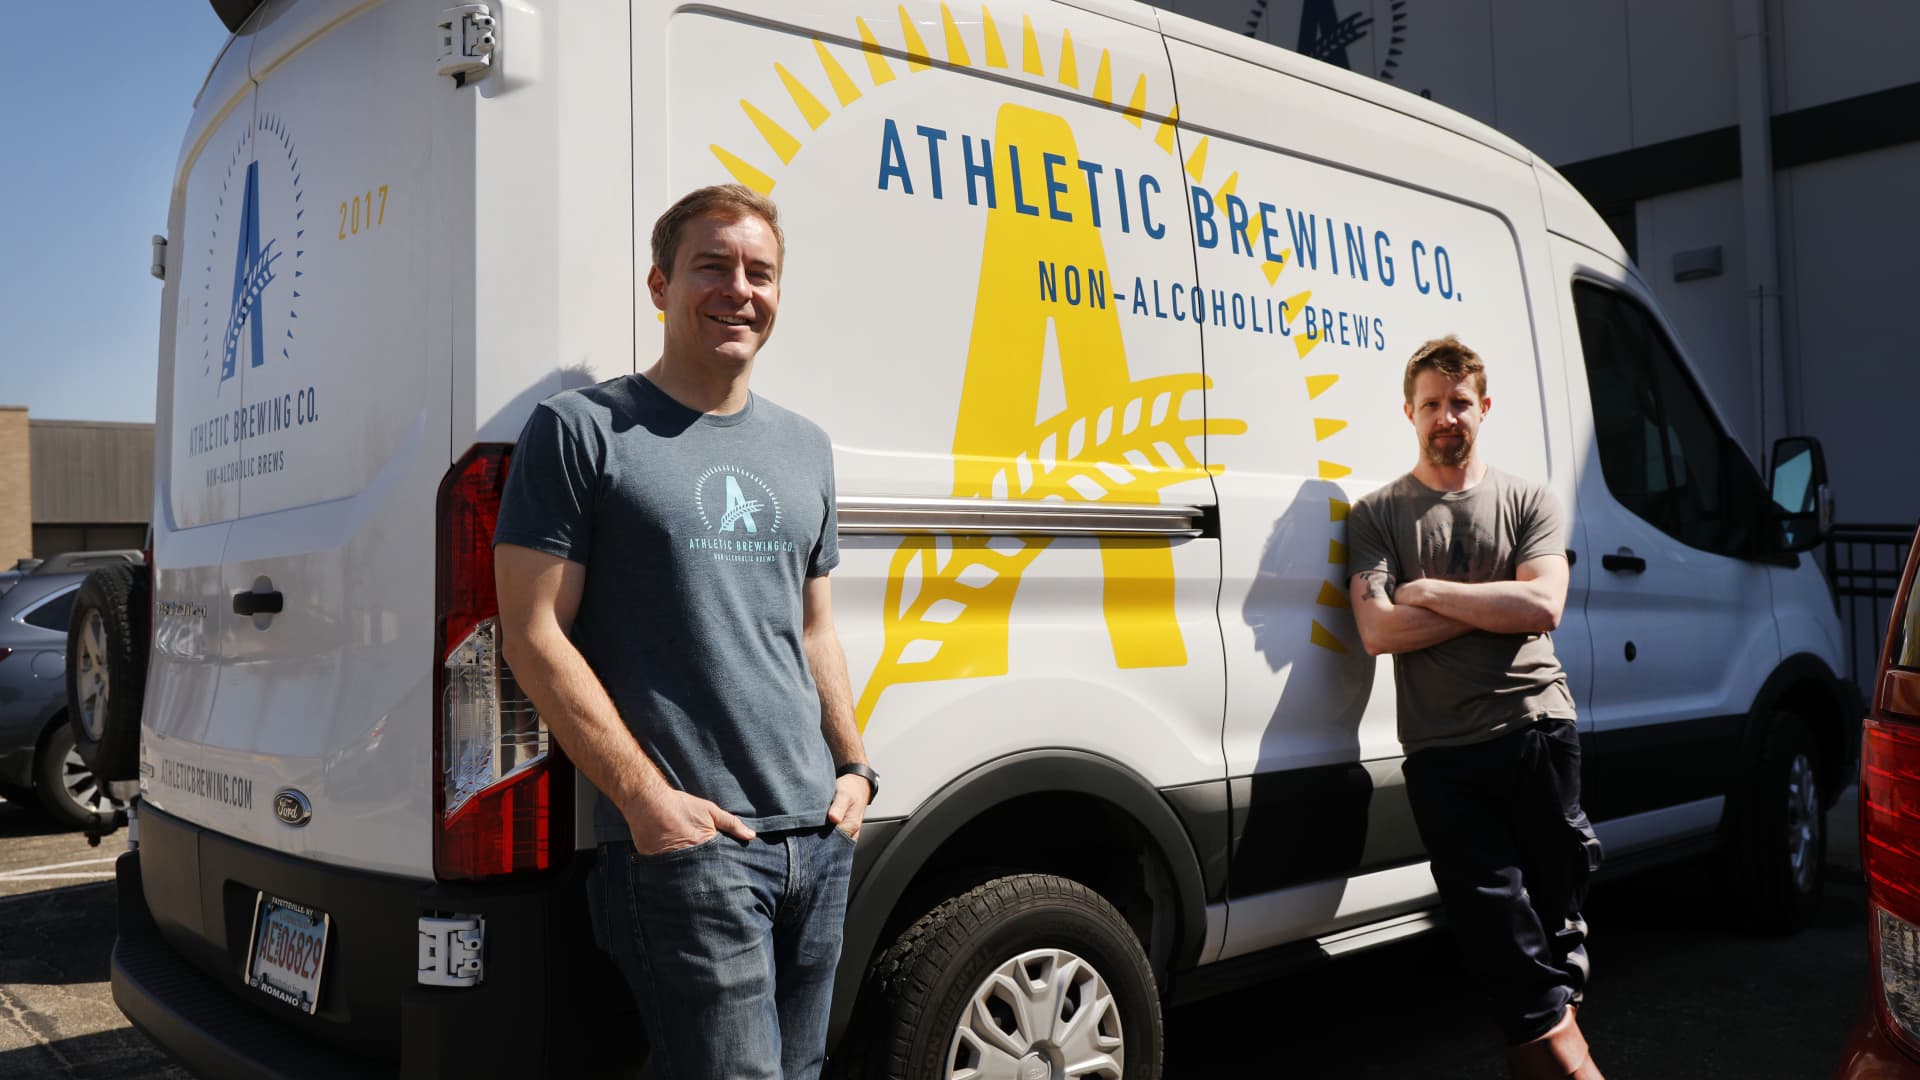 Non-alcoholic beer maker Athletic Brewing raises $50 million